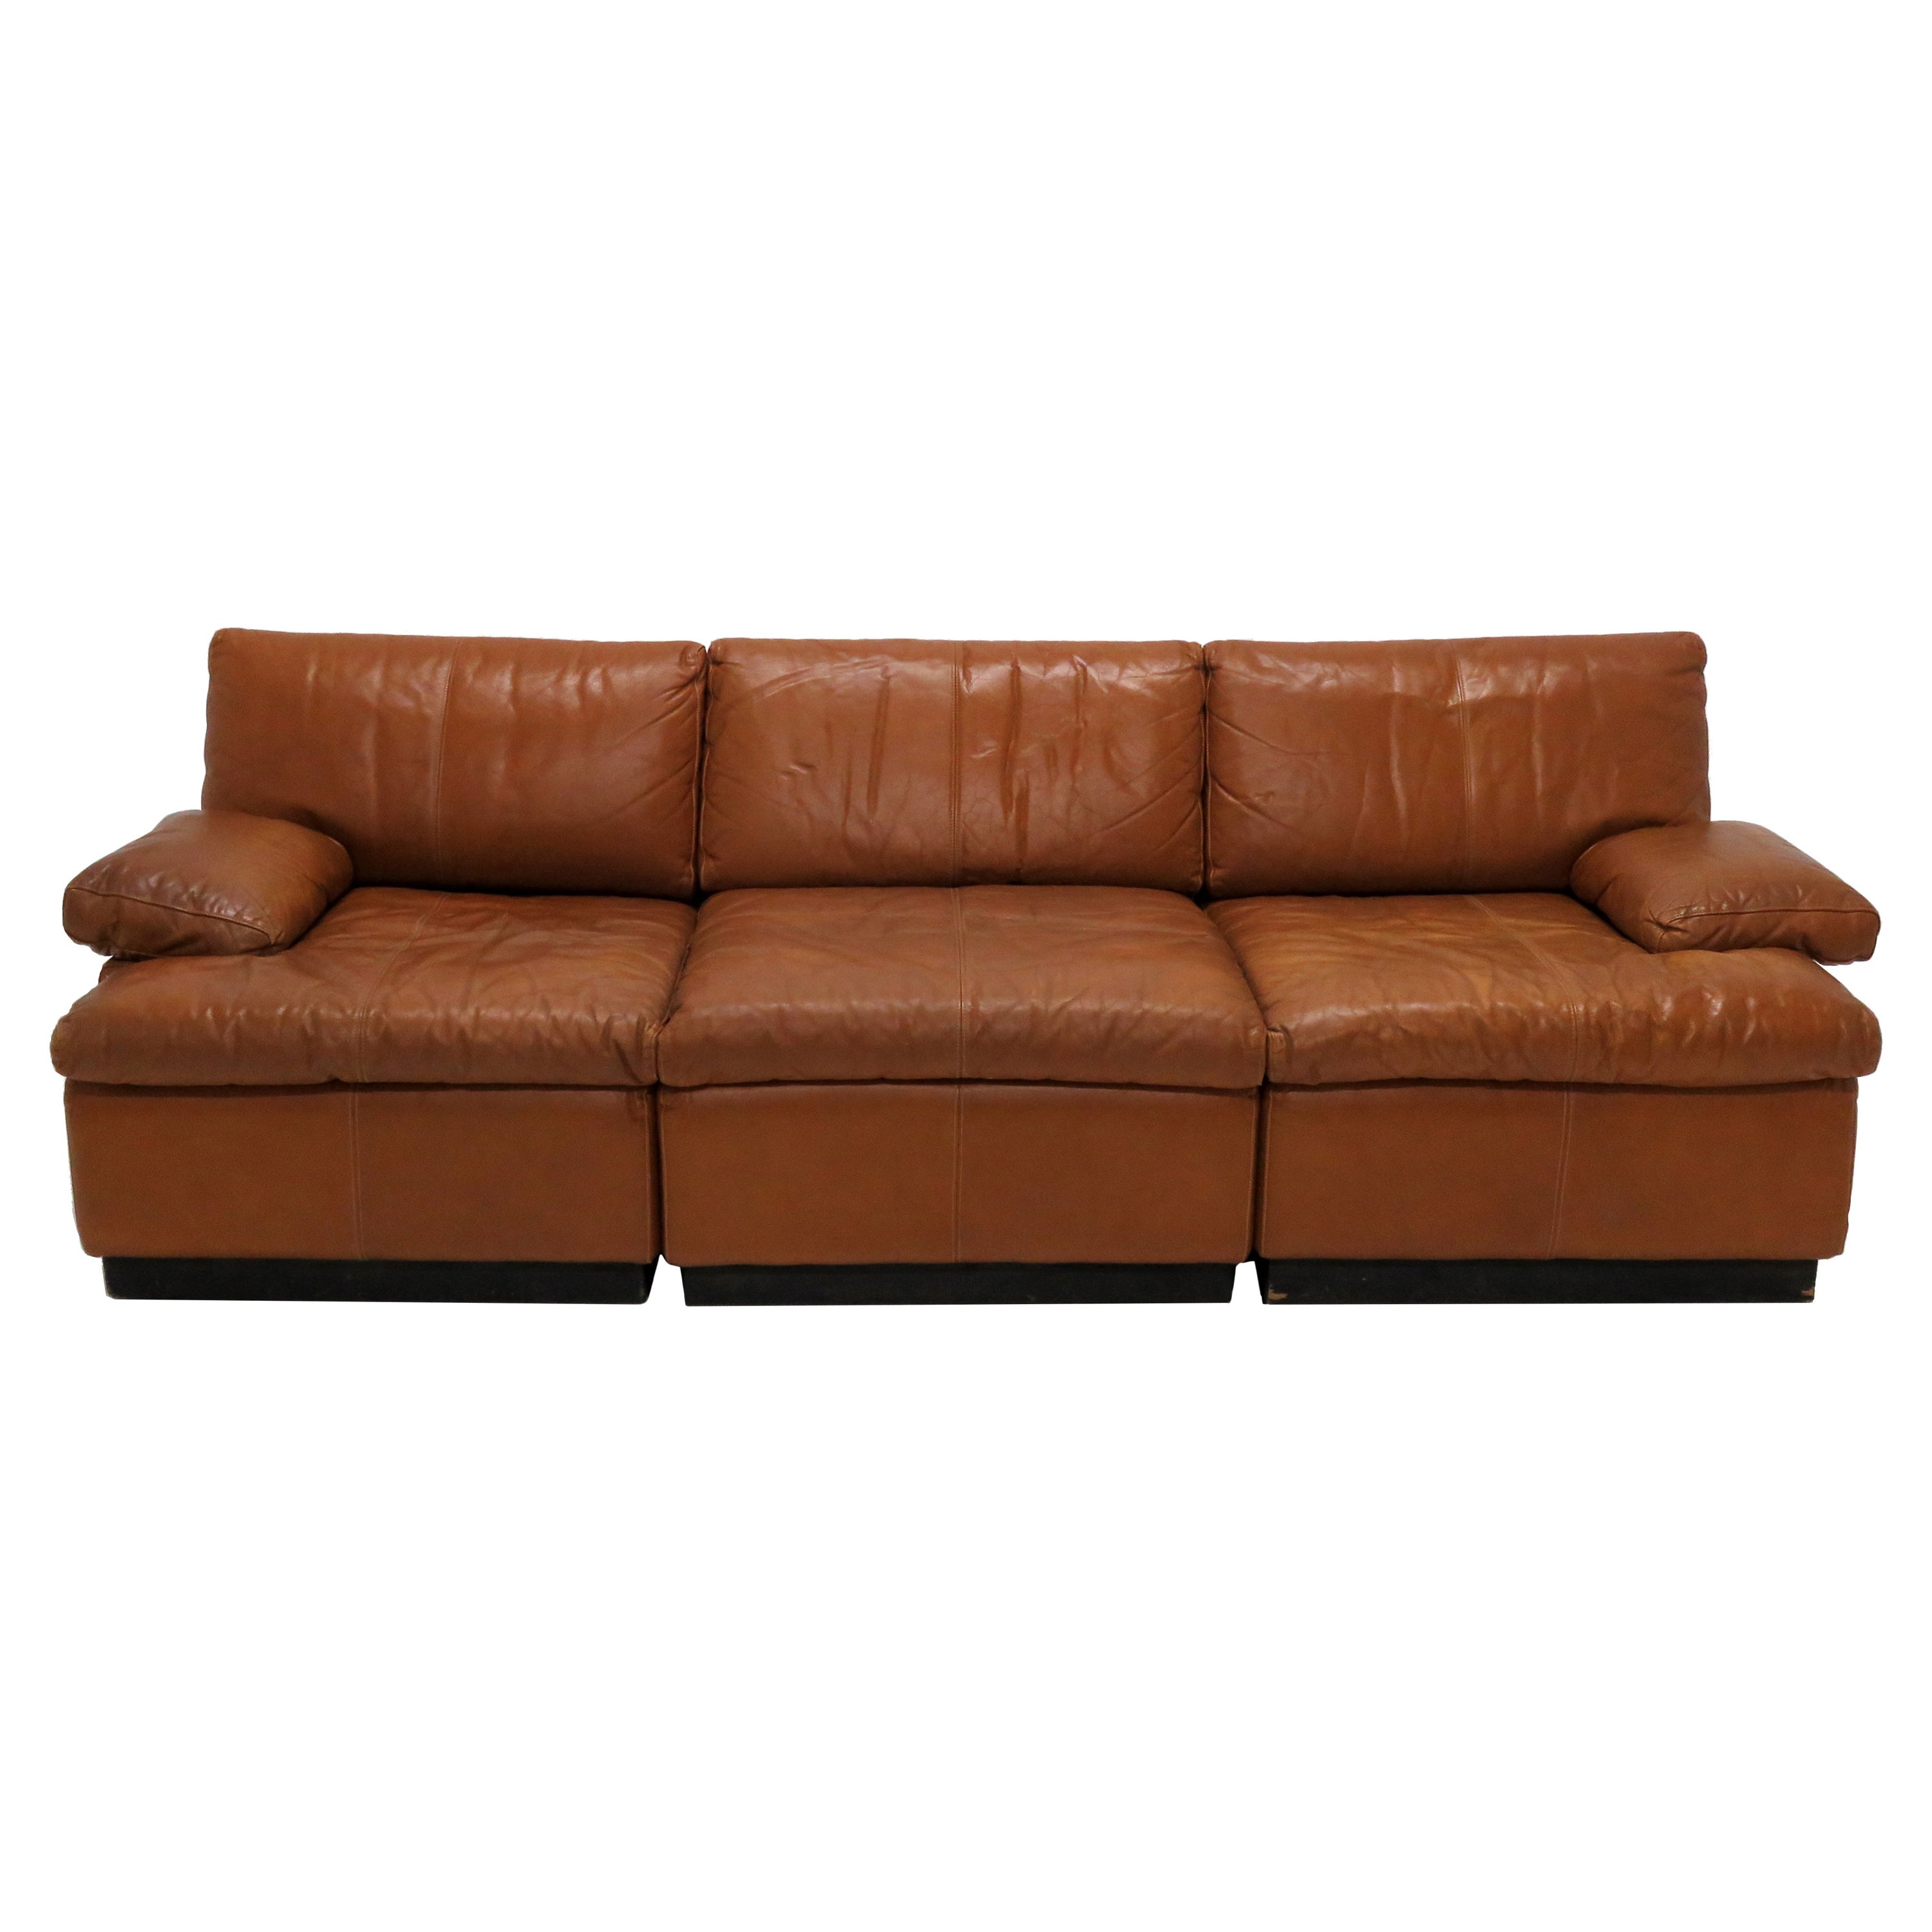 Finnish Modular Leather Sofa by BJ Dahlquist, 1970 For Sale